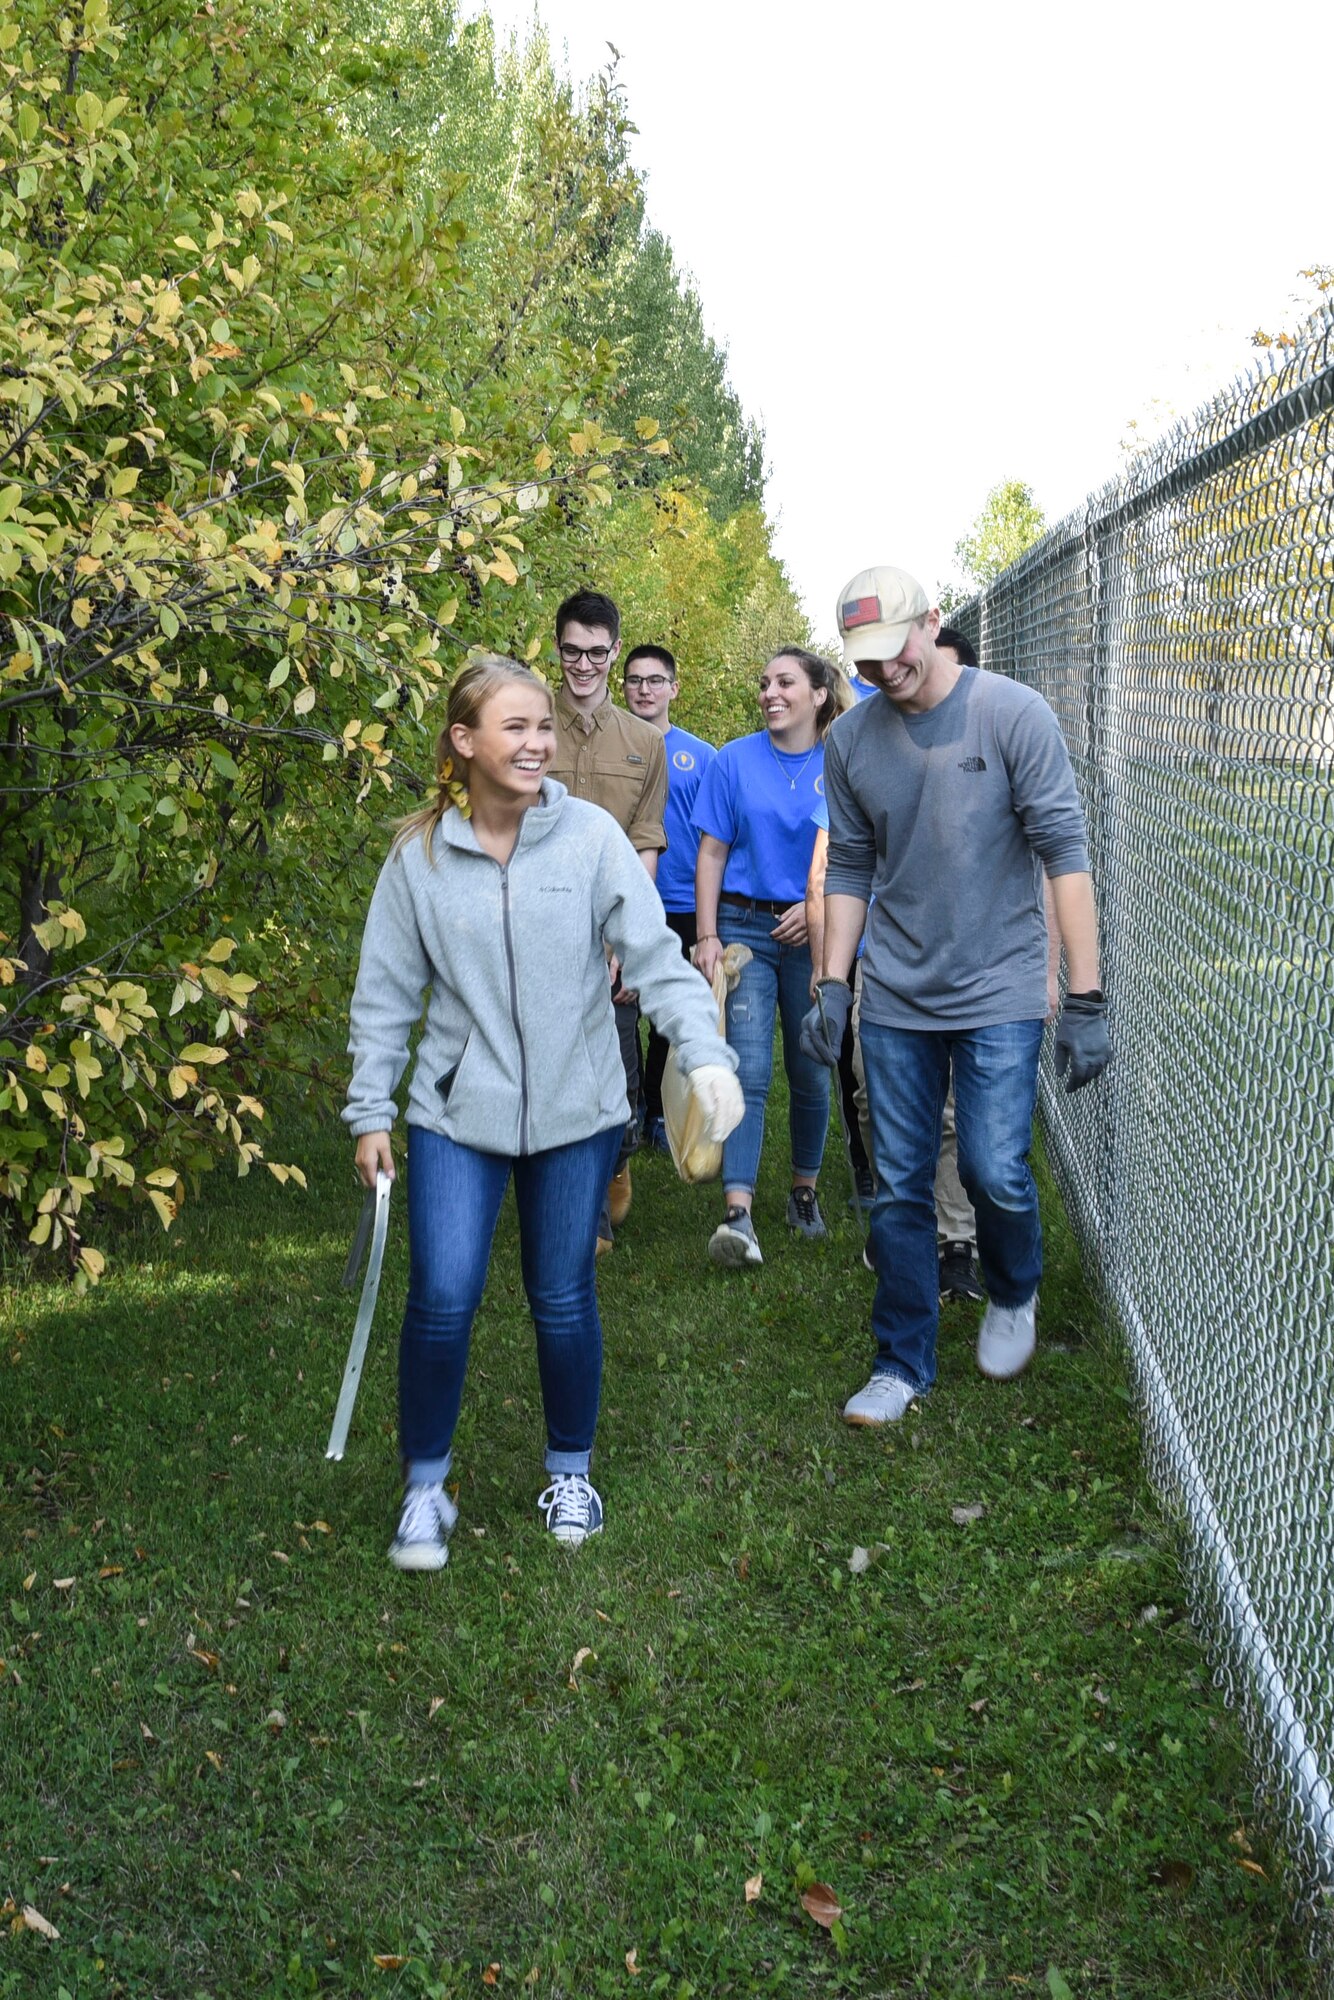 Airmen from the 348th Reconnaissance Squadron help pick up garbage around Circle of Friends Humane Society Sept. 19, 2018, in Grand Forks, North Dakota. The Airmen aided in picking up trash, metal, and other rubbish from the highway by the shelter, to ensure the safety of the animals when they are running around outside. (U.S. Air Force photo by Airman 1st Class Melody Wolff)